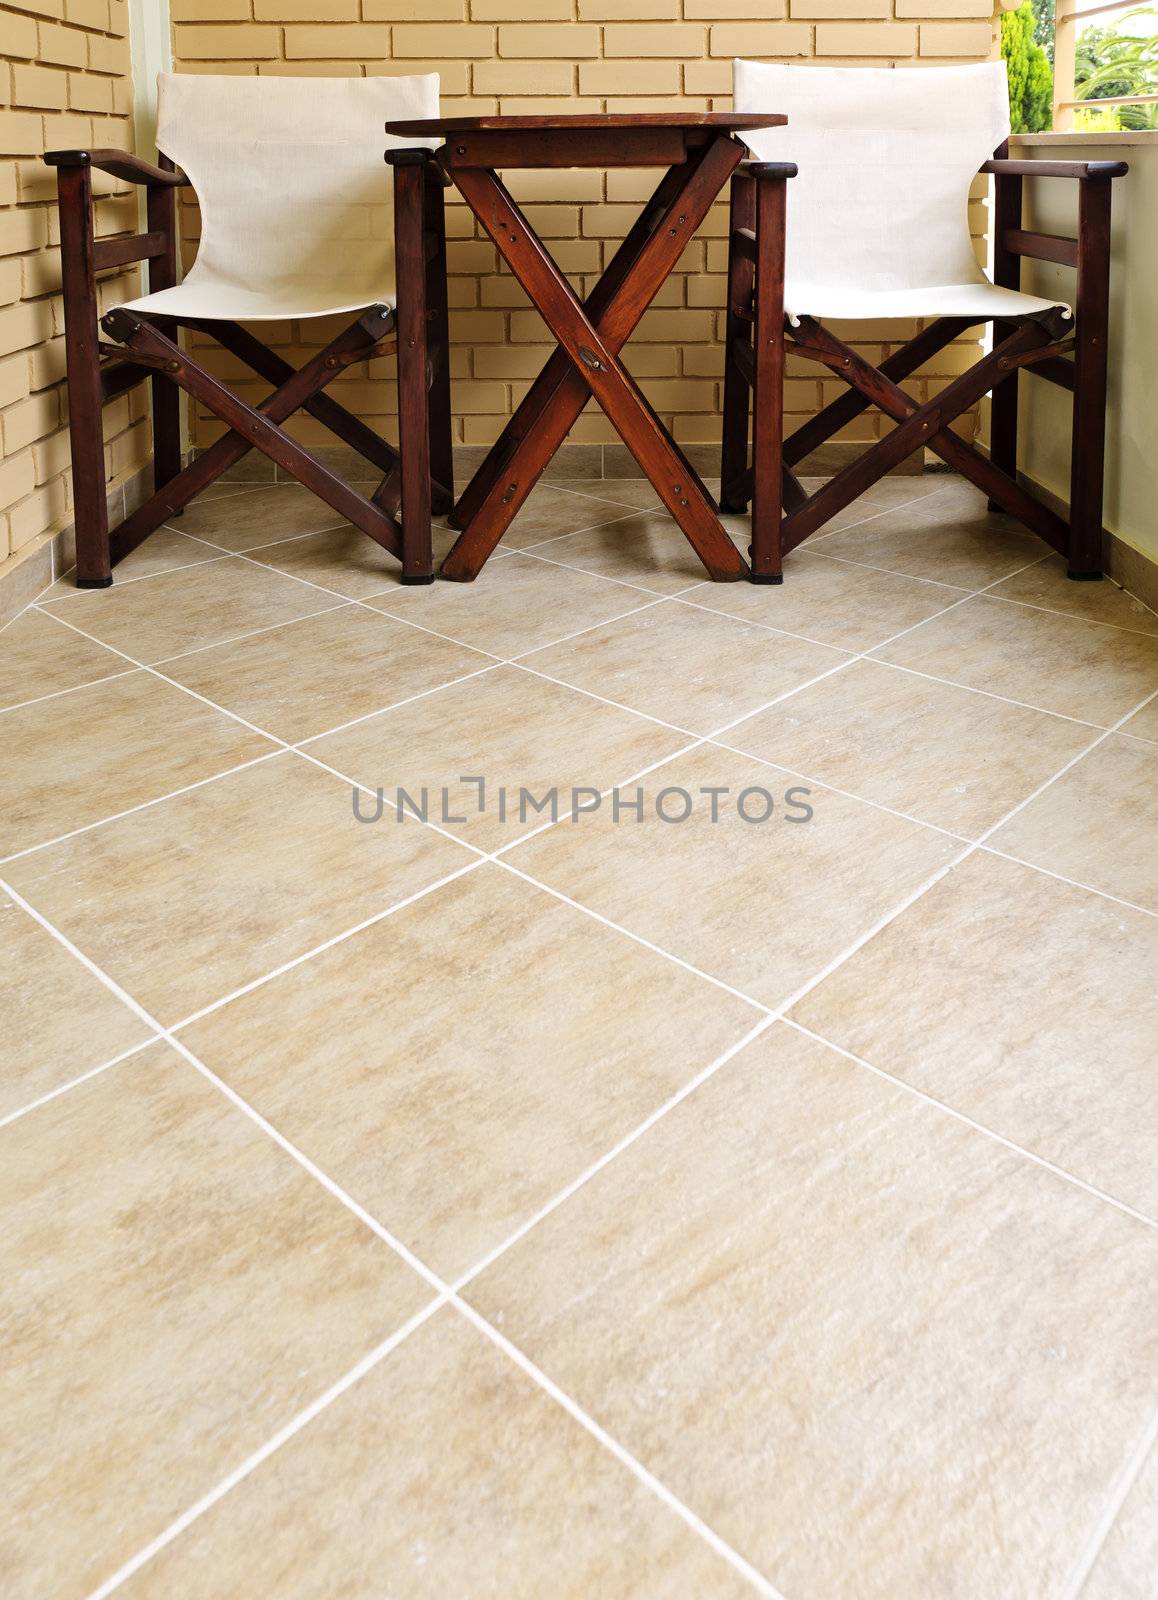 Chairs and table on tiled floor by elenathewise